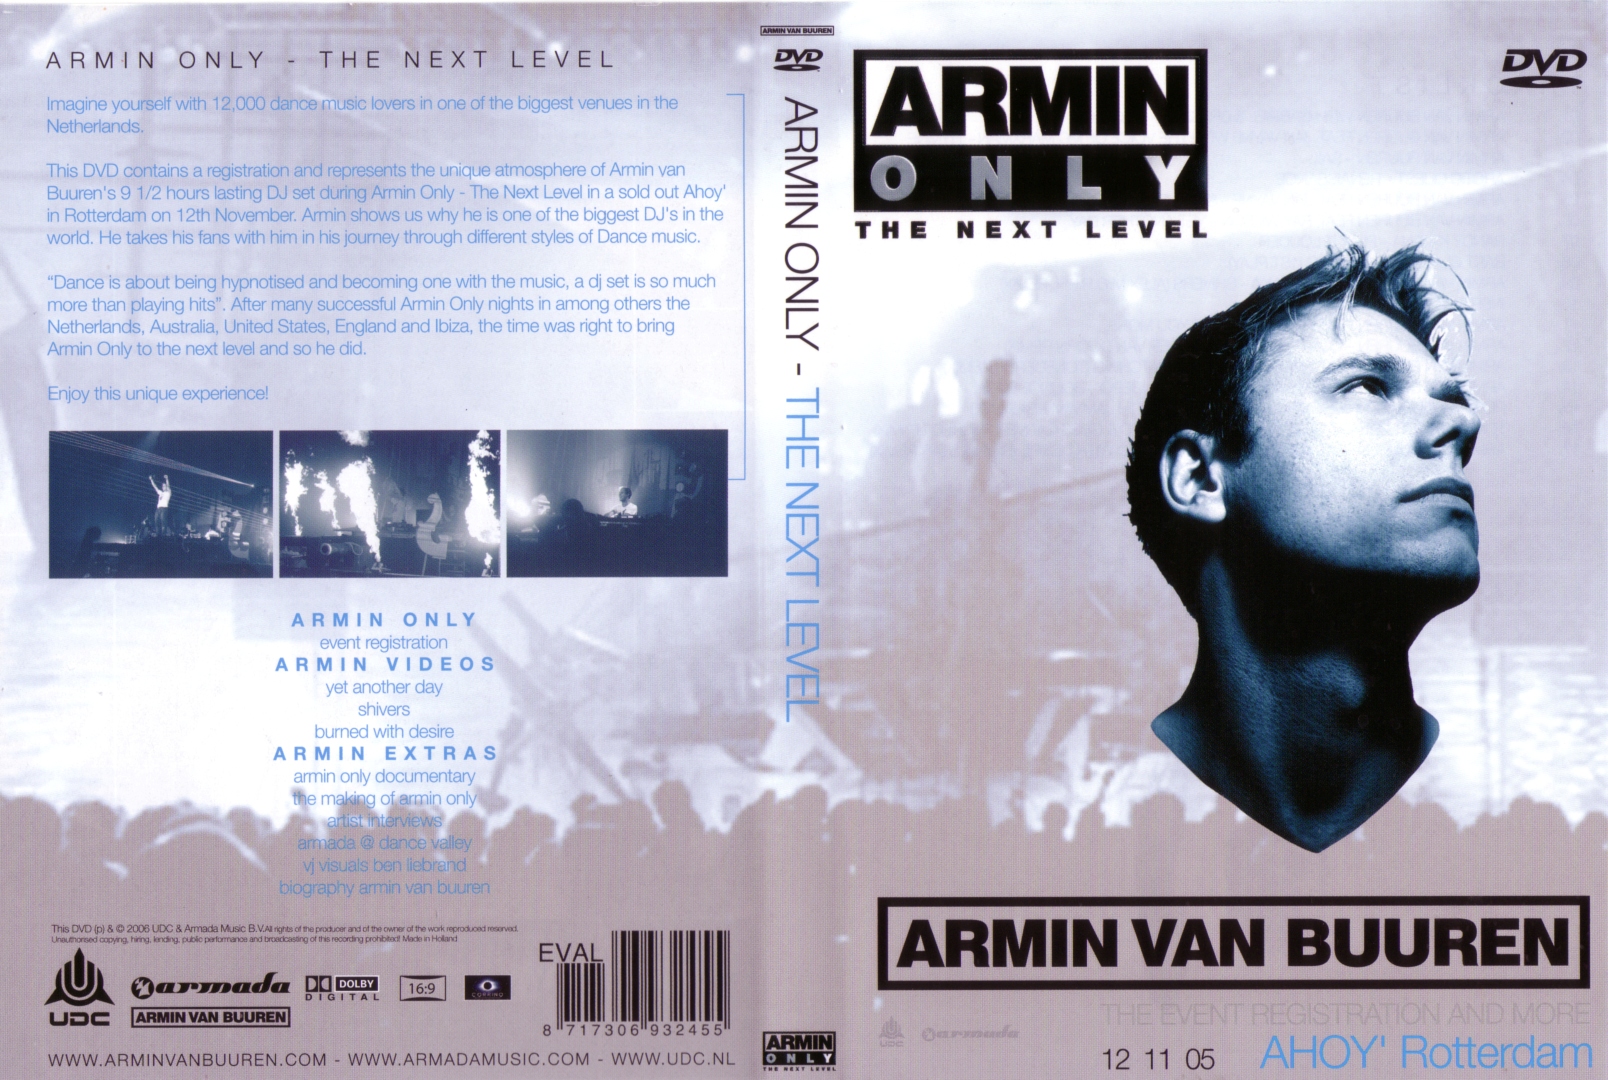 Jaquette DVD Armin Only the next level